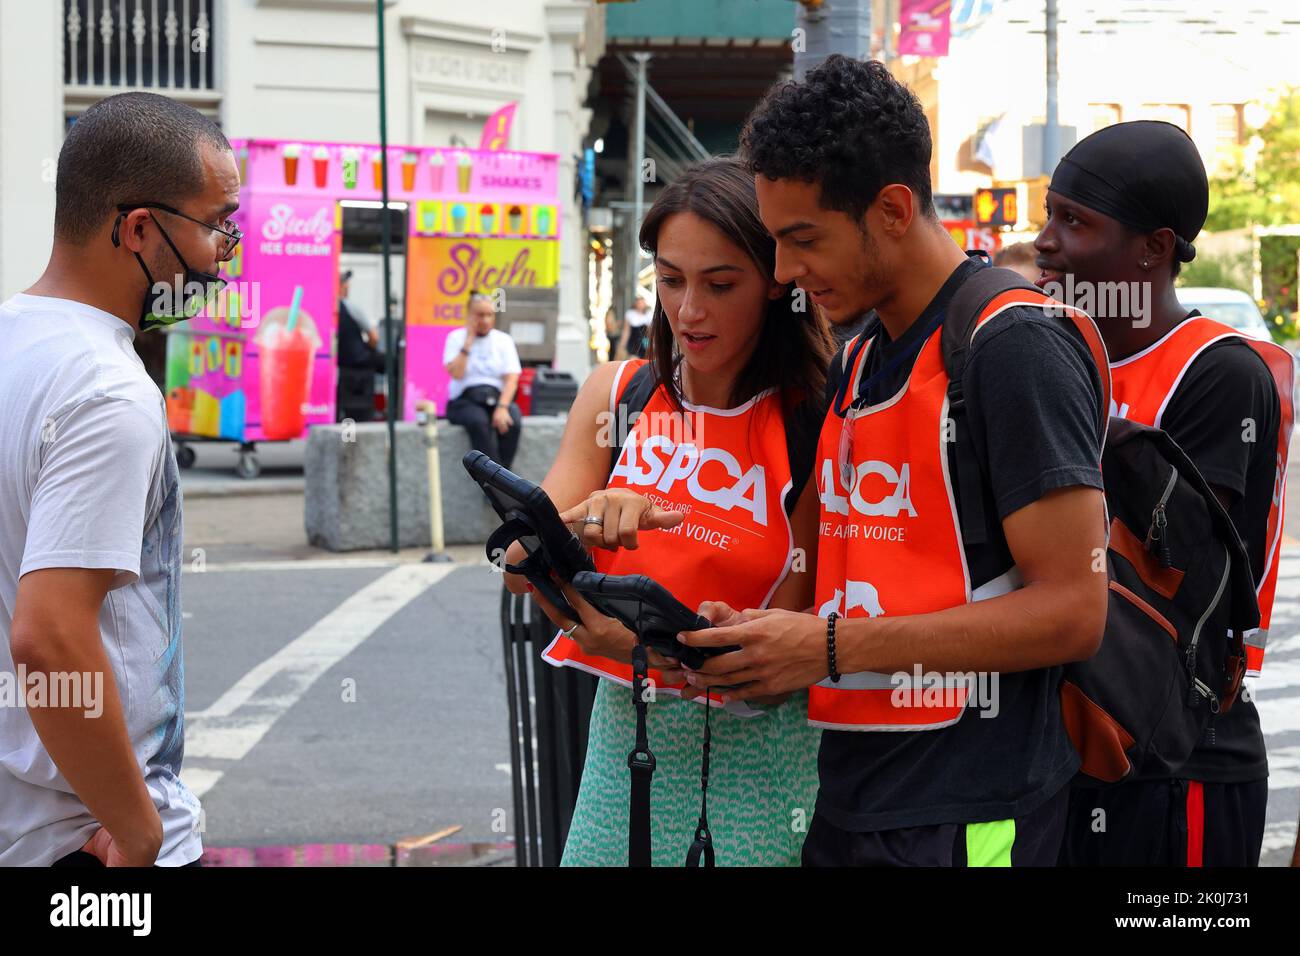 Street canvassers, solicitors in New York canvassing for the charitable organization ASPCA soliciting info and donations from people on the sidewalk Stock Photo